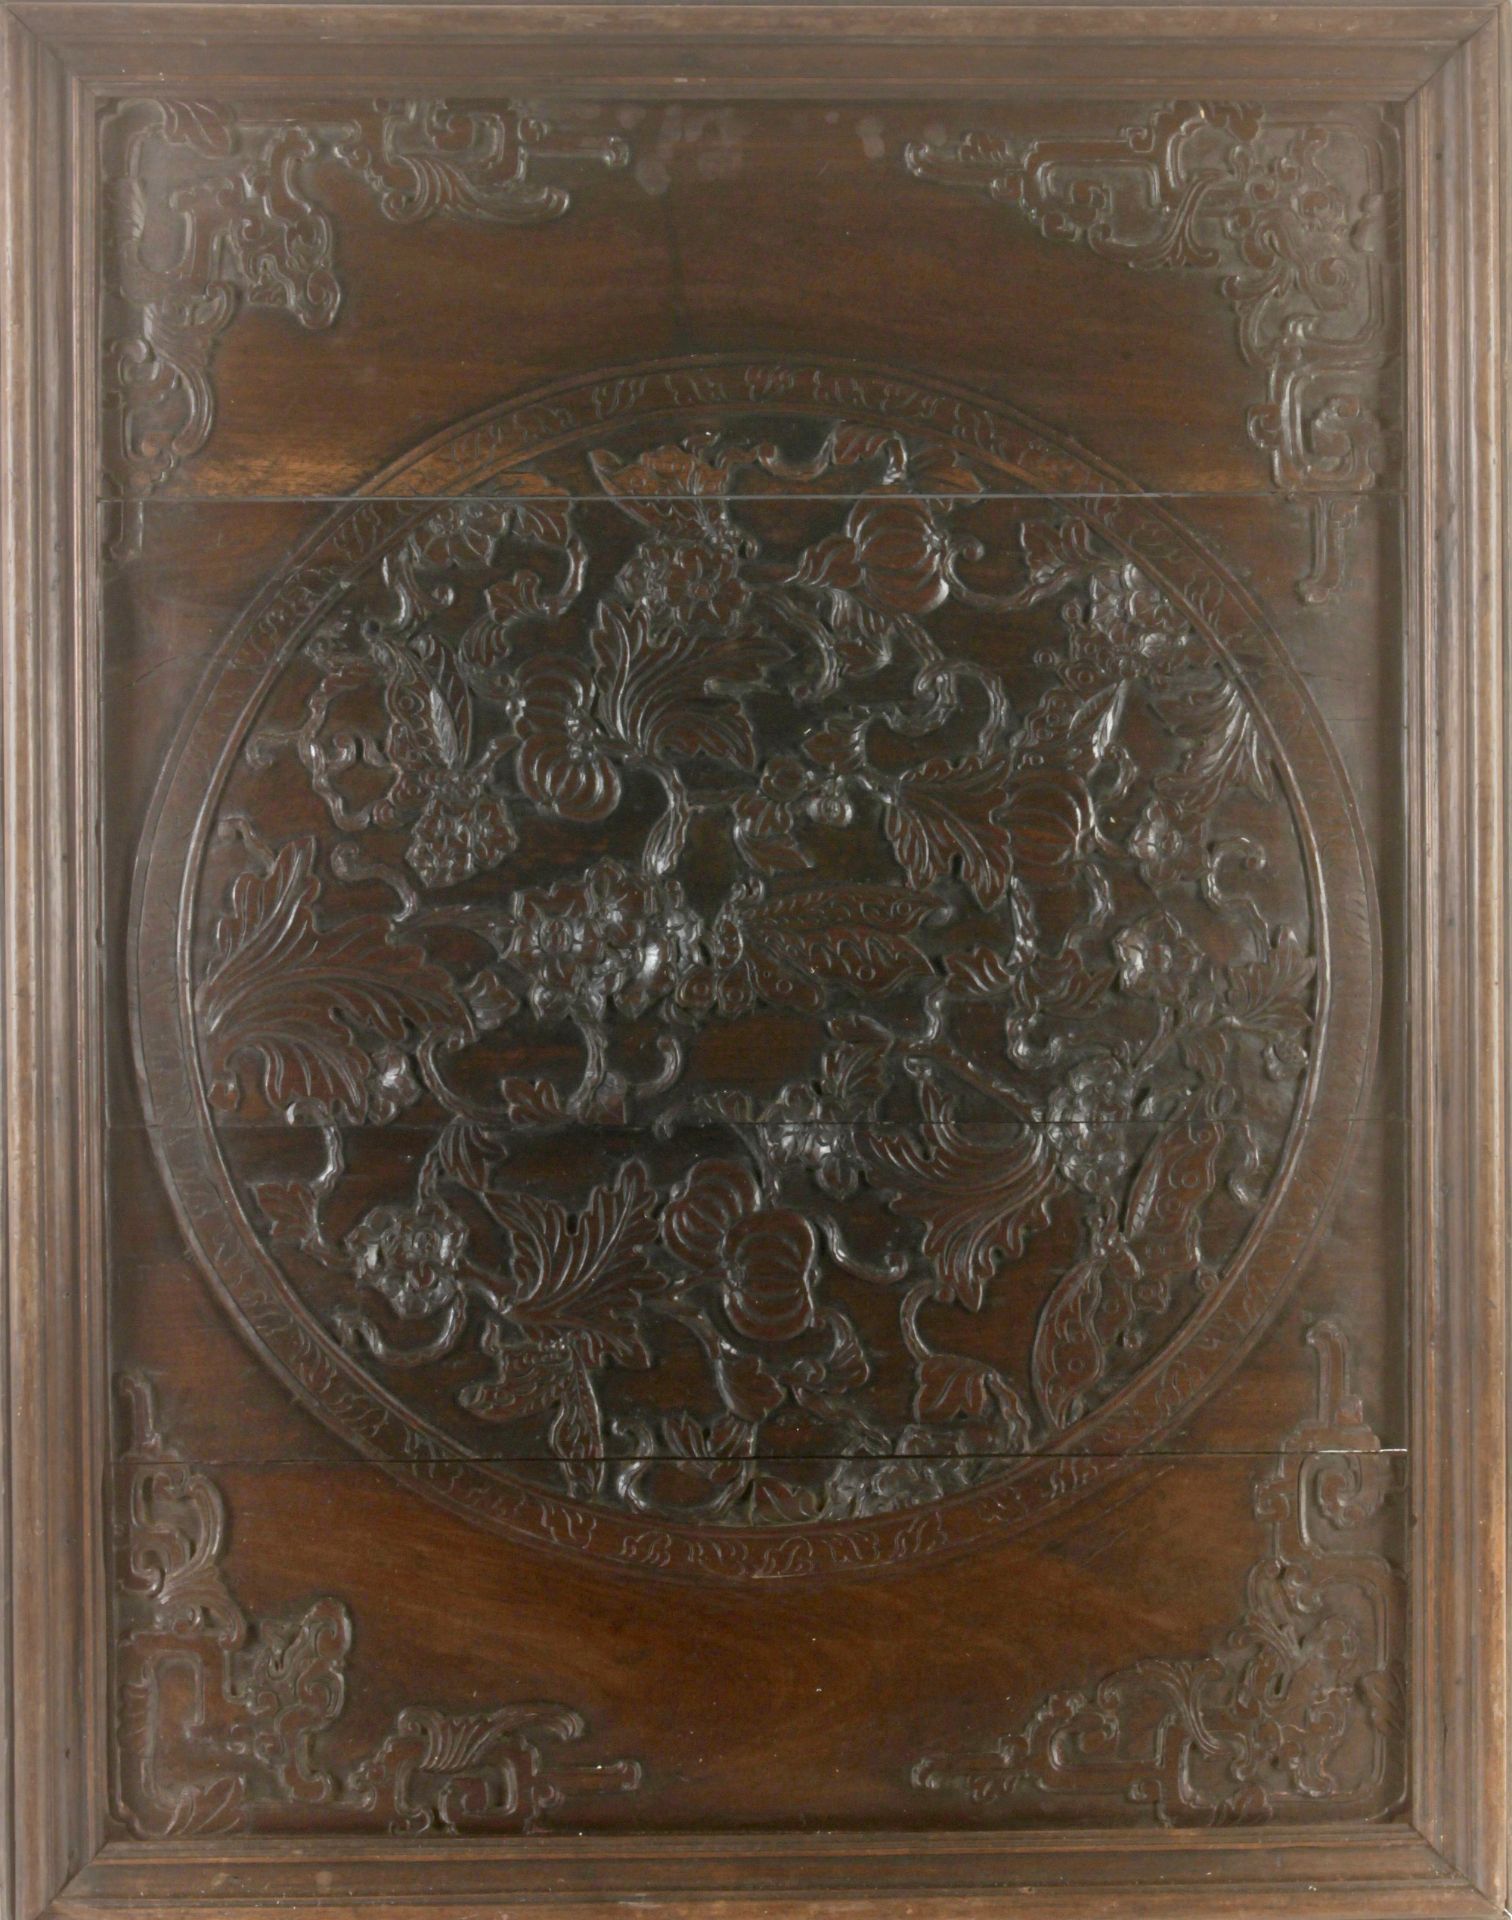 A Chinese carving from Qing dynasty possibly in zitan wood - Image 2 of 3